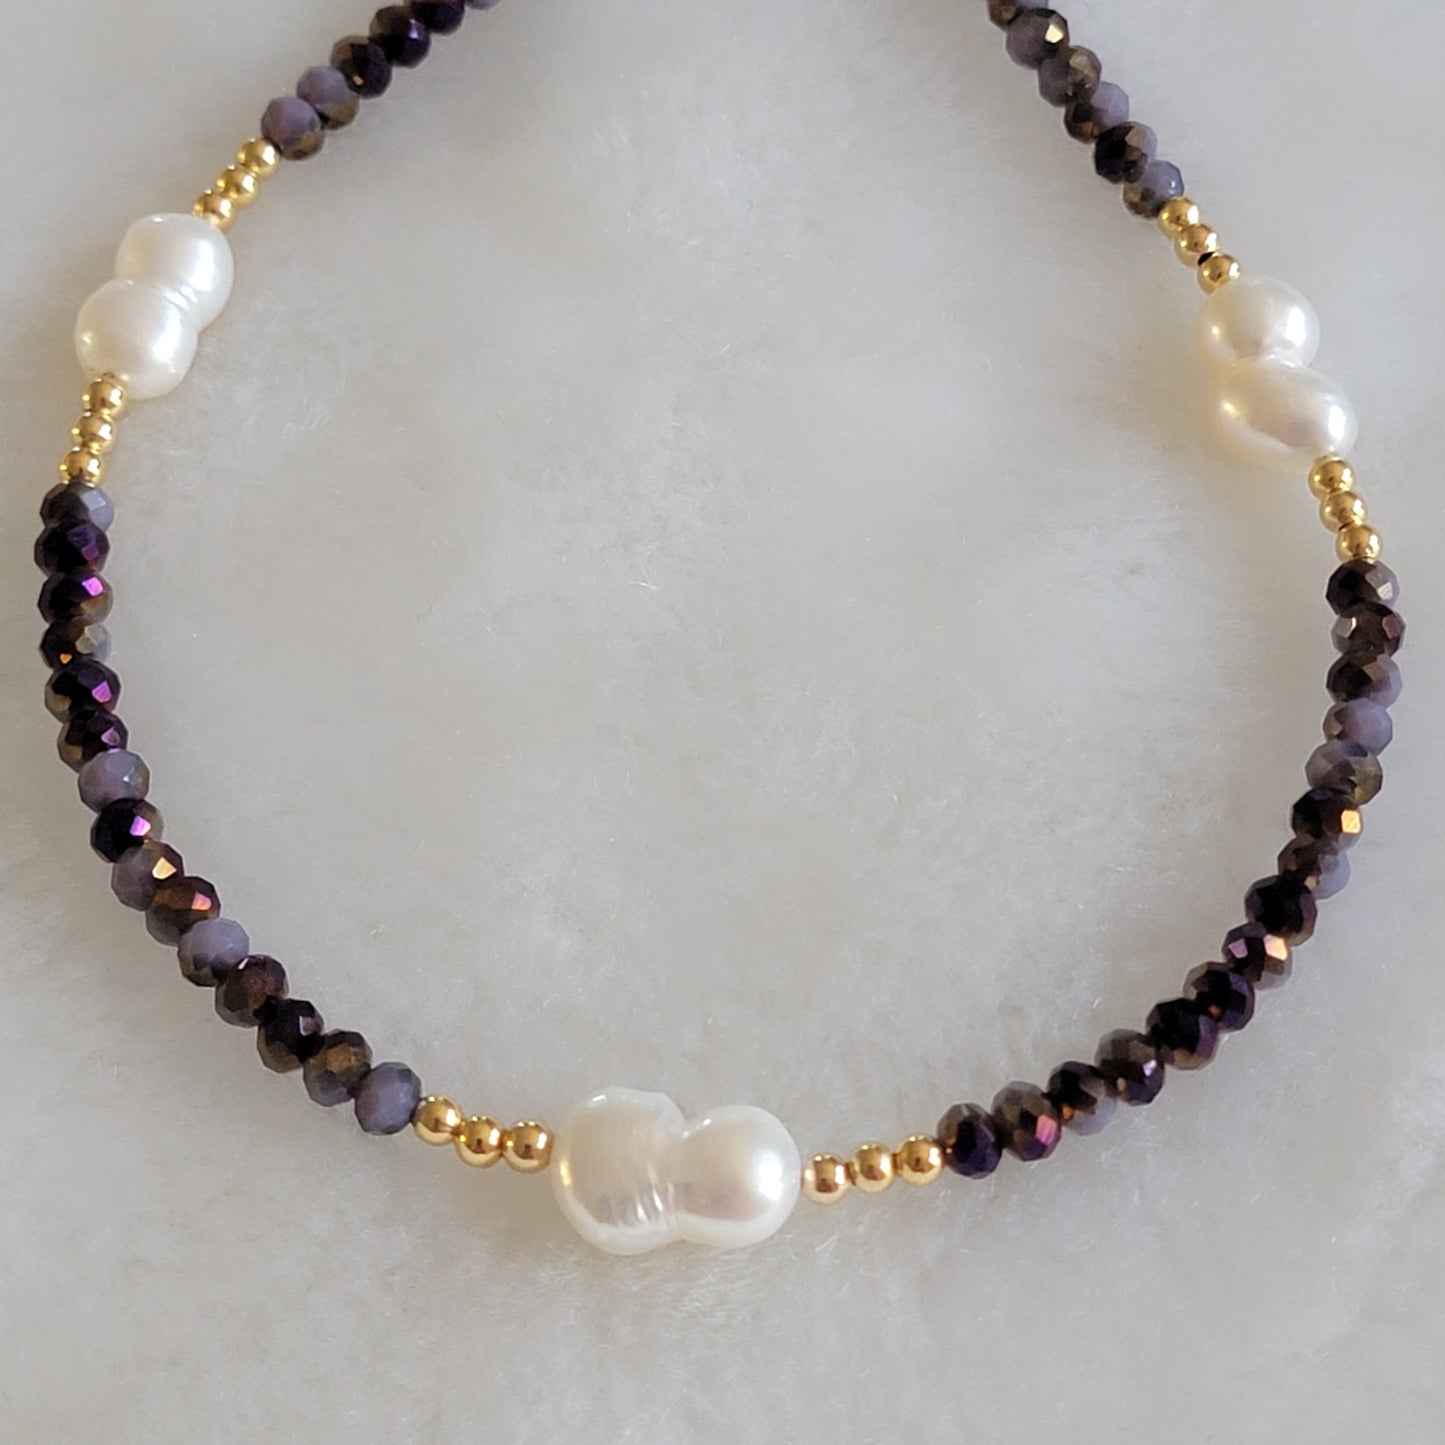 Translucent Crystals & Freshwater Pearls Necklace